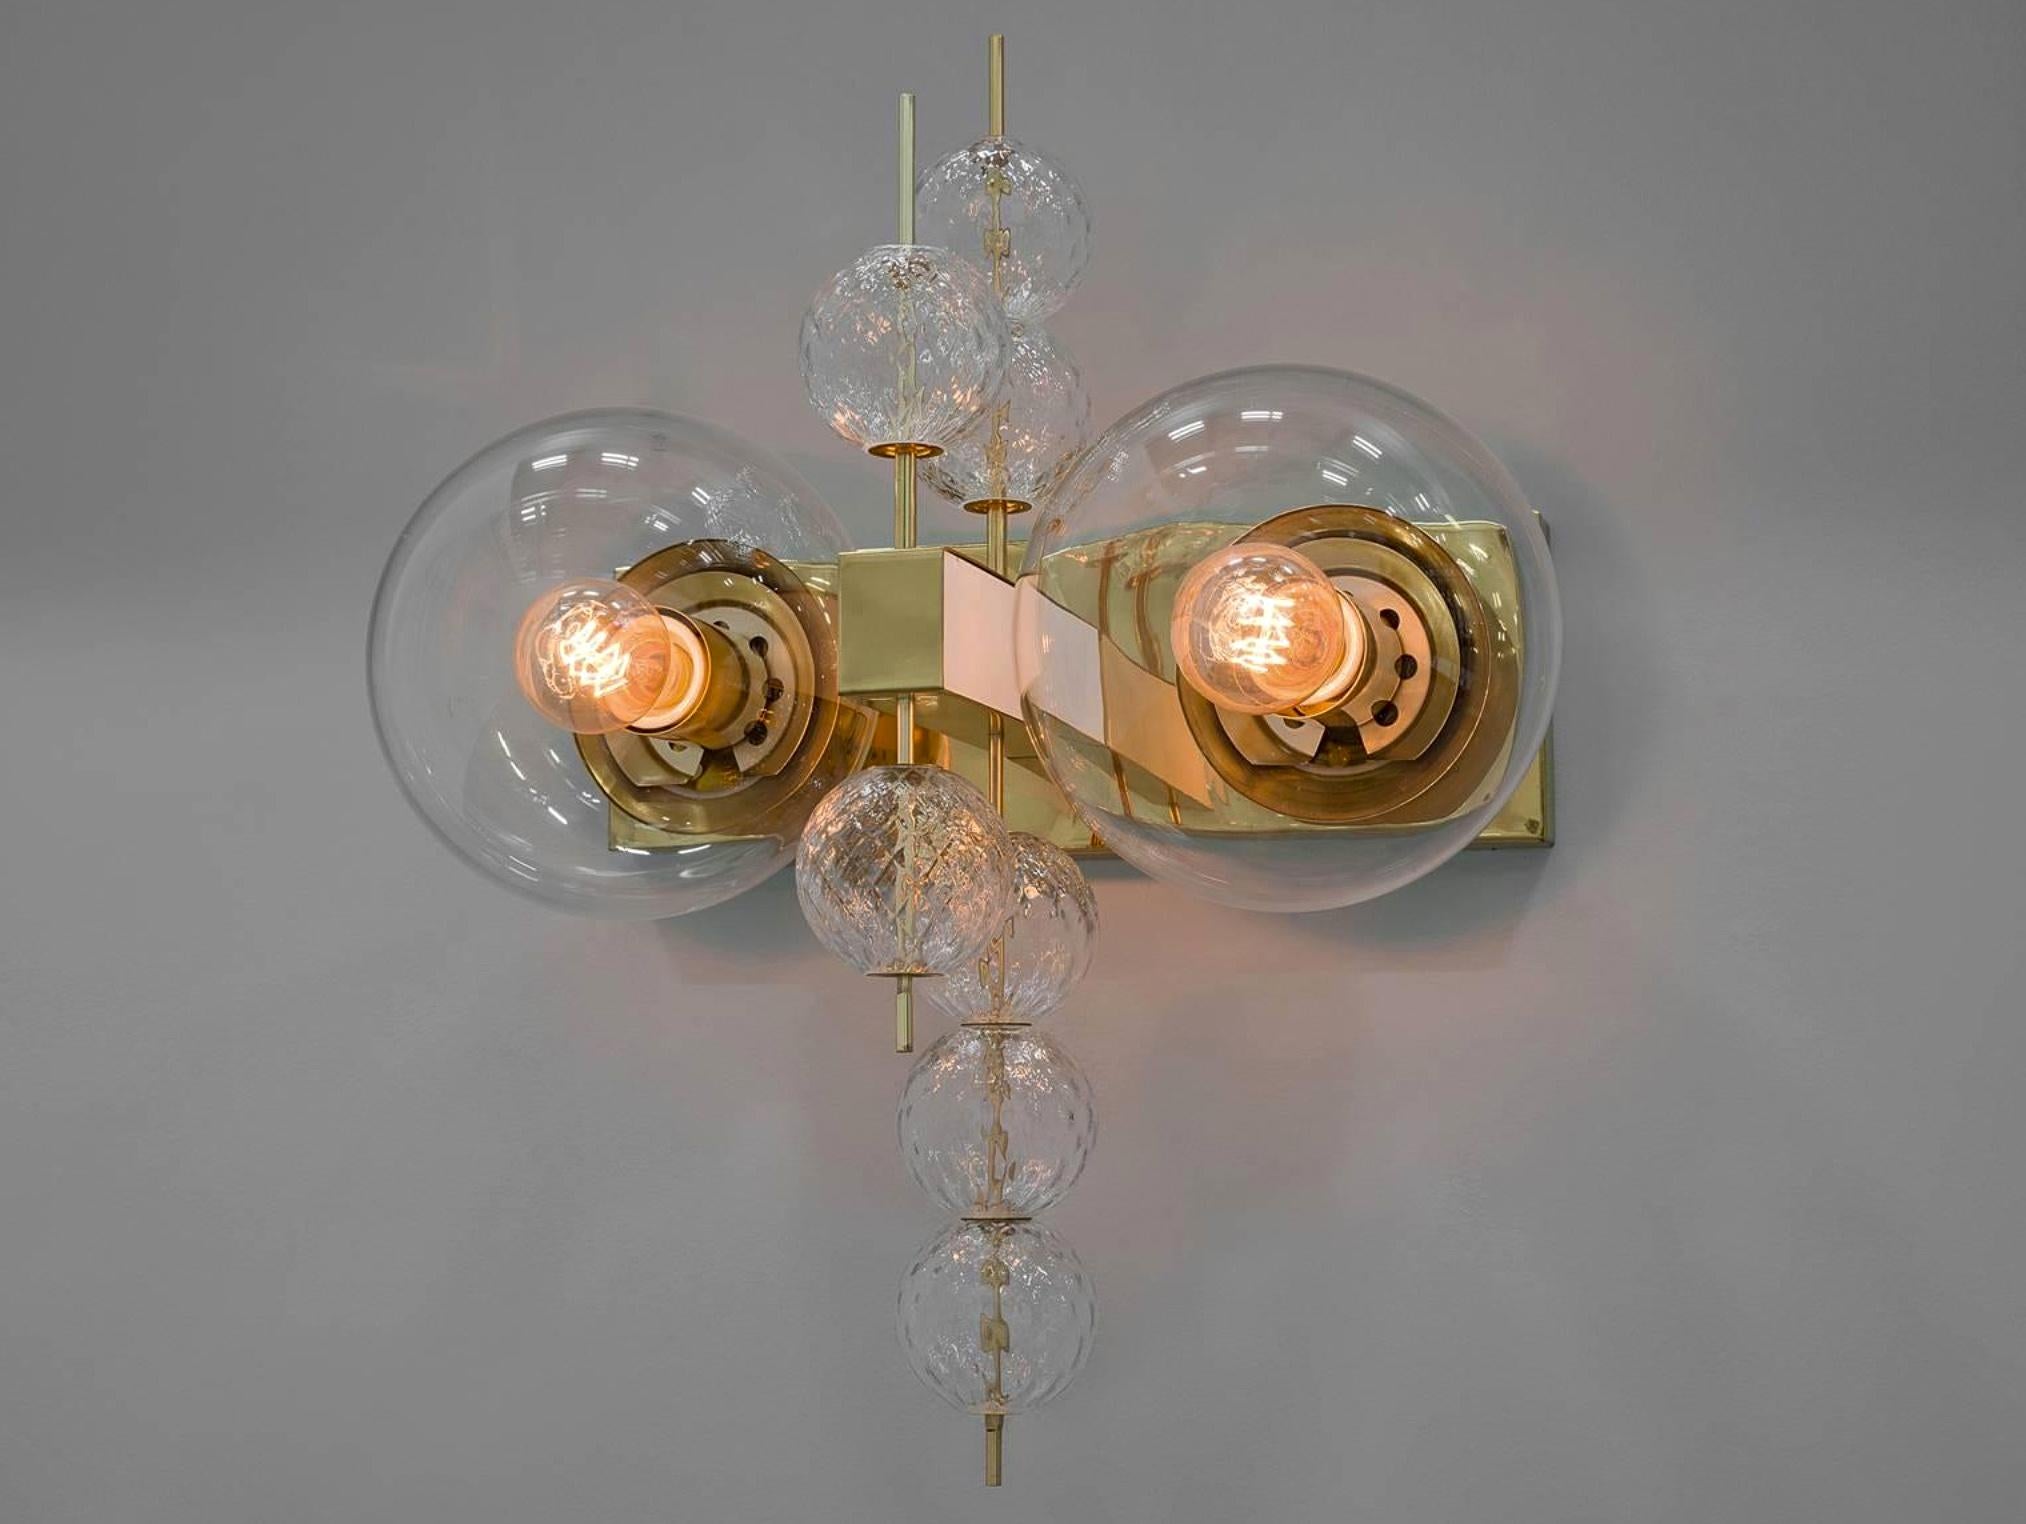 Set Midcentury Hotel Wall Chandeliers with Brass Fixture, European, 1970s For Sale 2